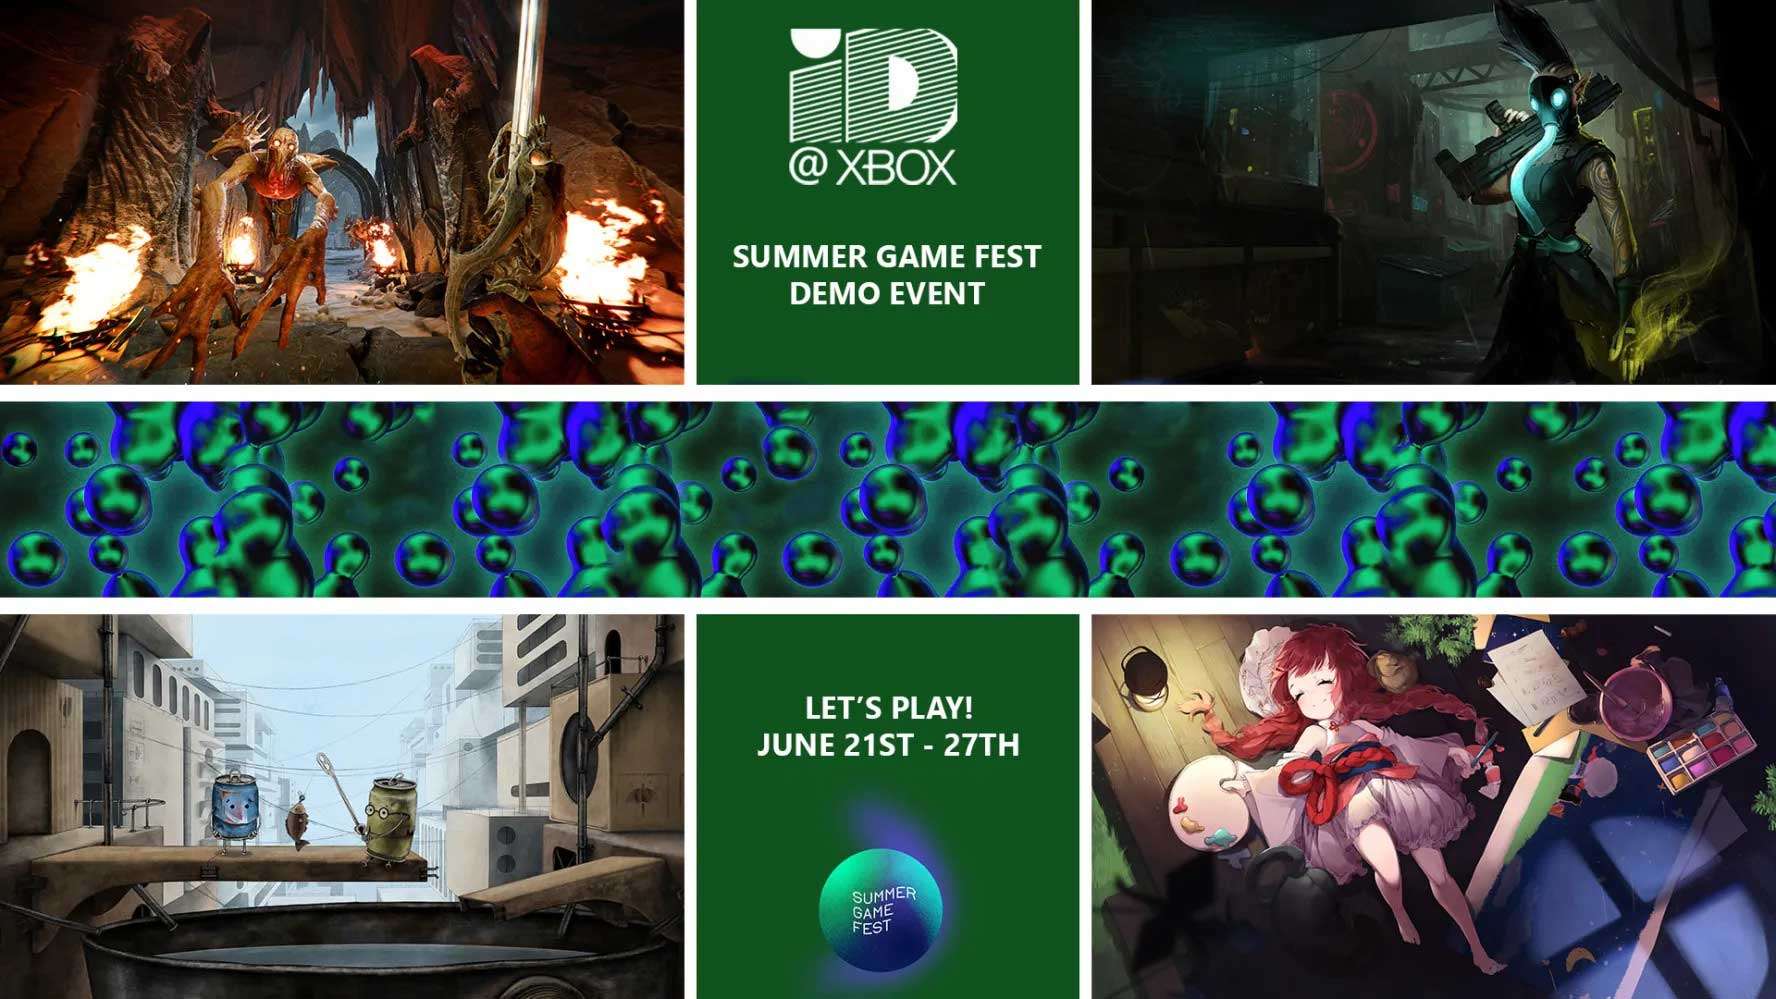 ID@Xbox Summer Game Fest Demo event starts today